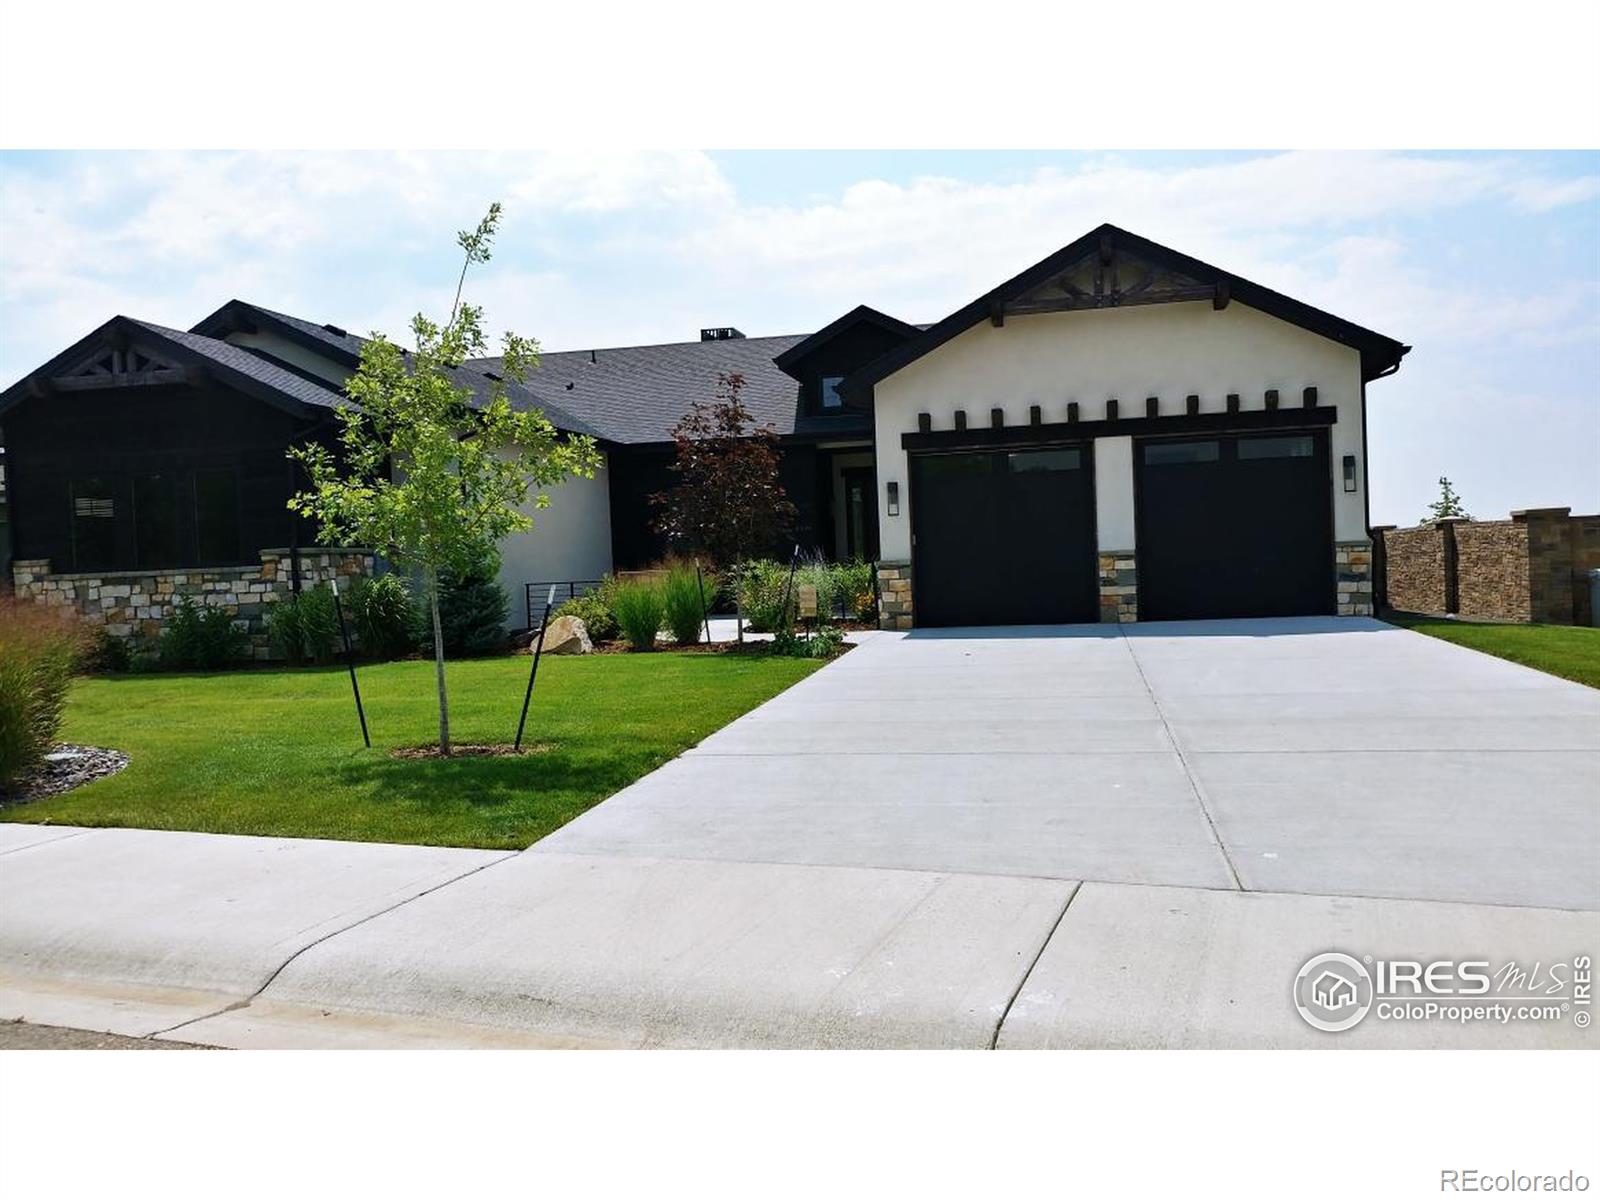 Report Image for 6359  Foundry Court,Timnath, Colorado